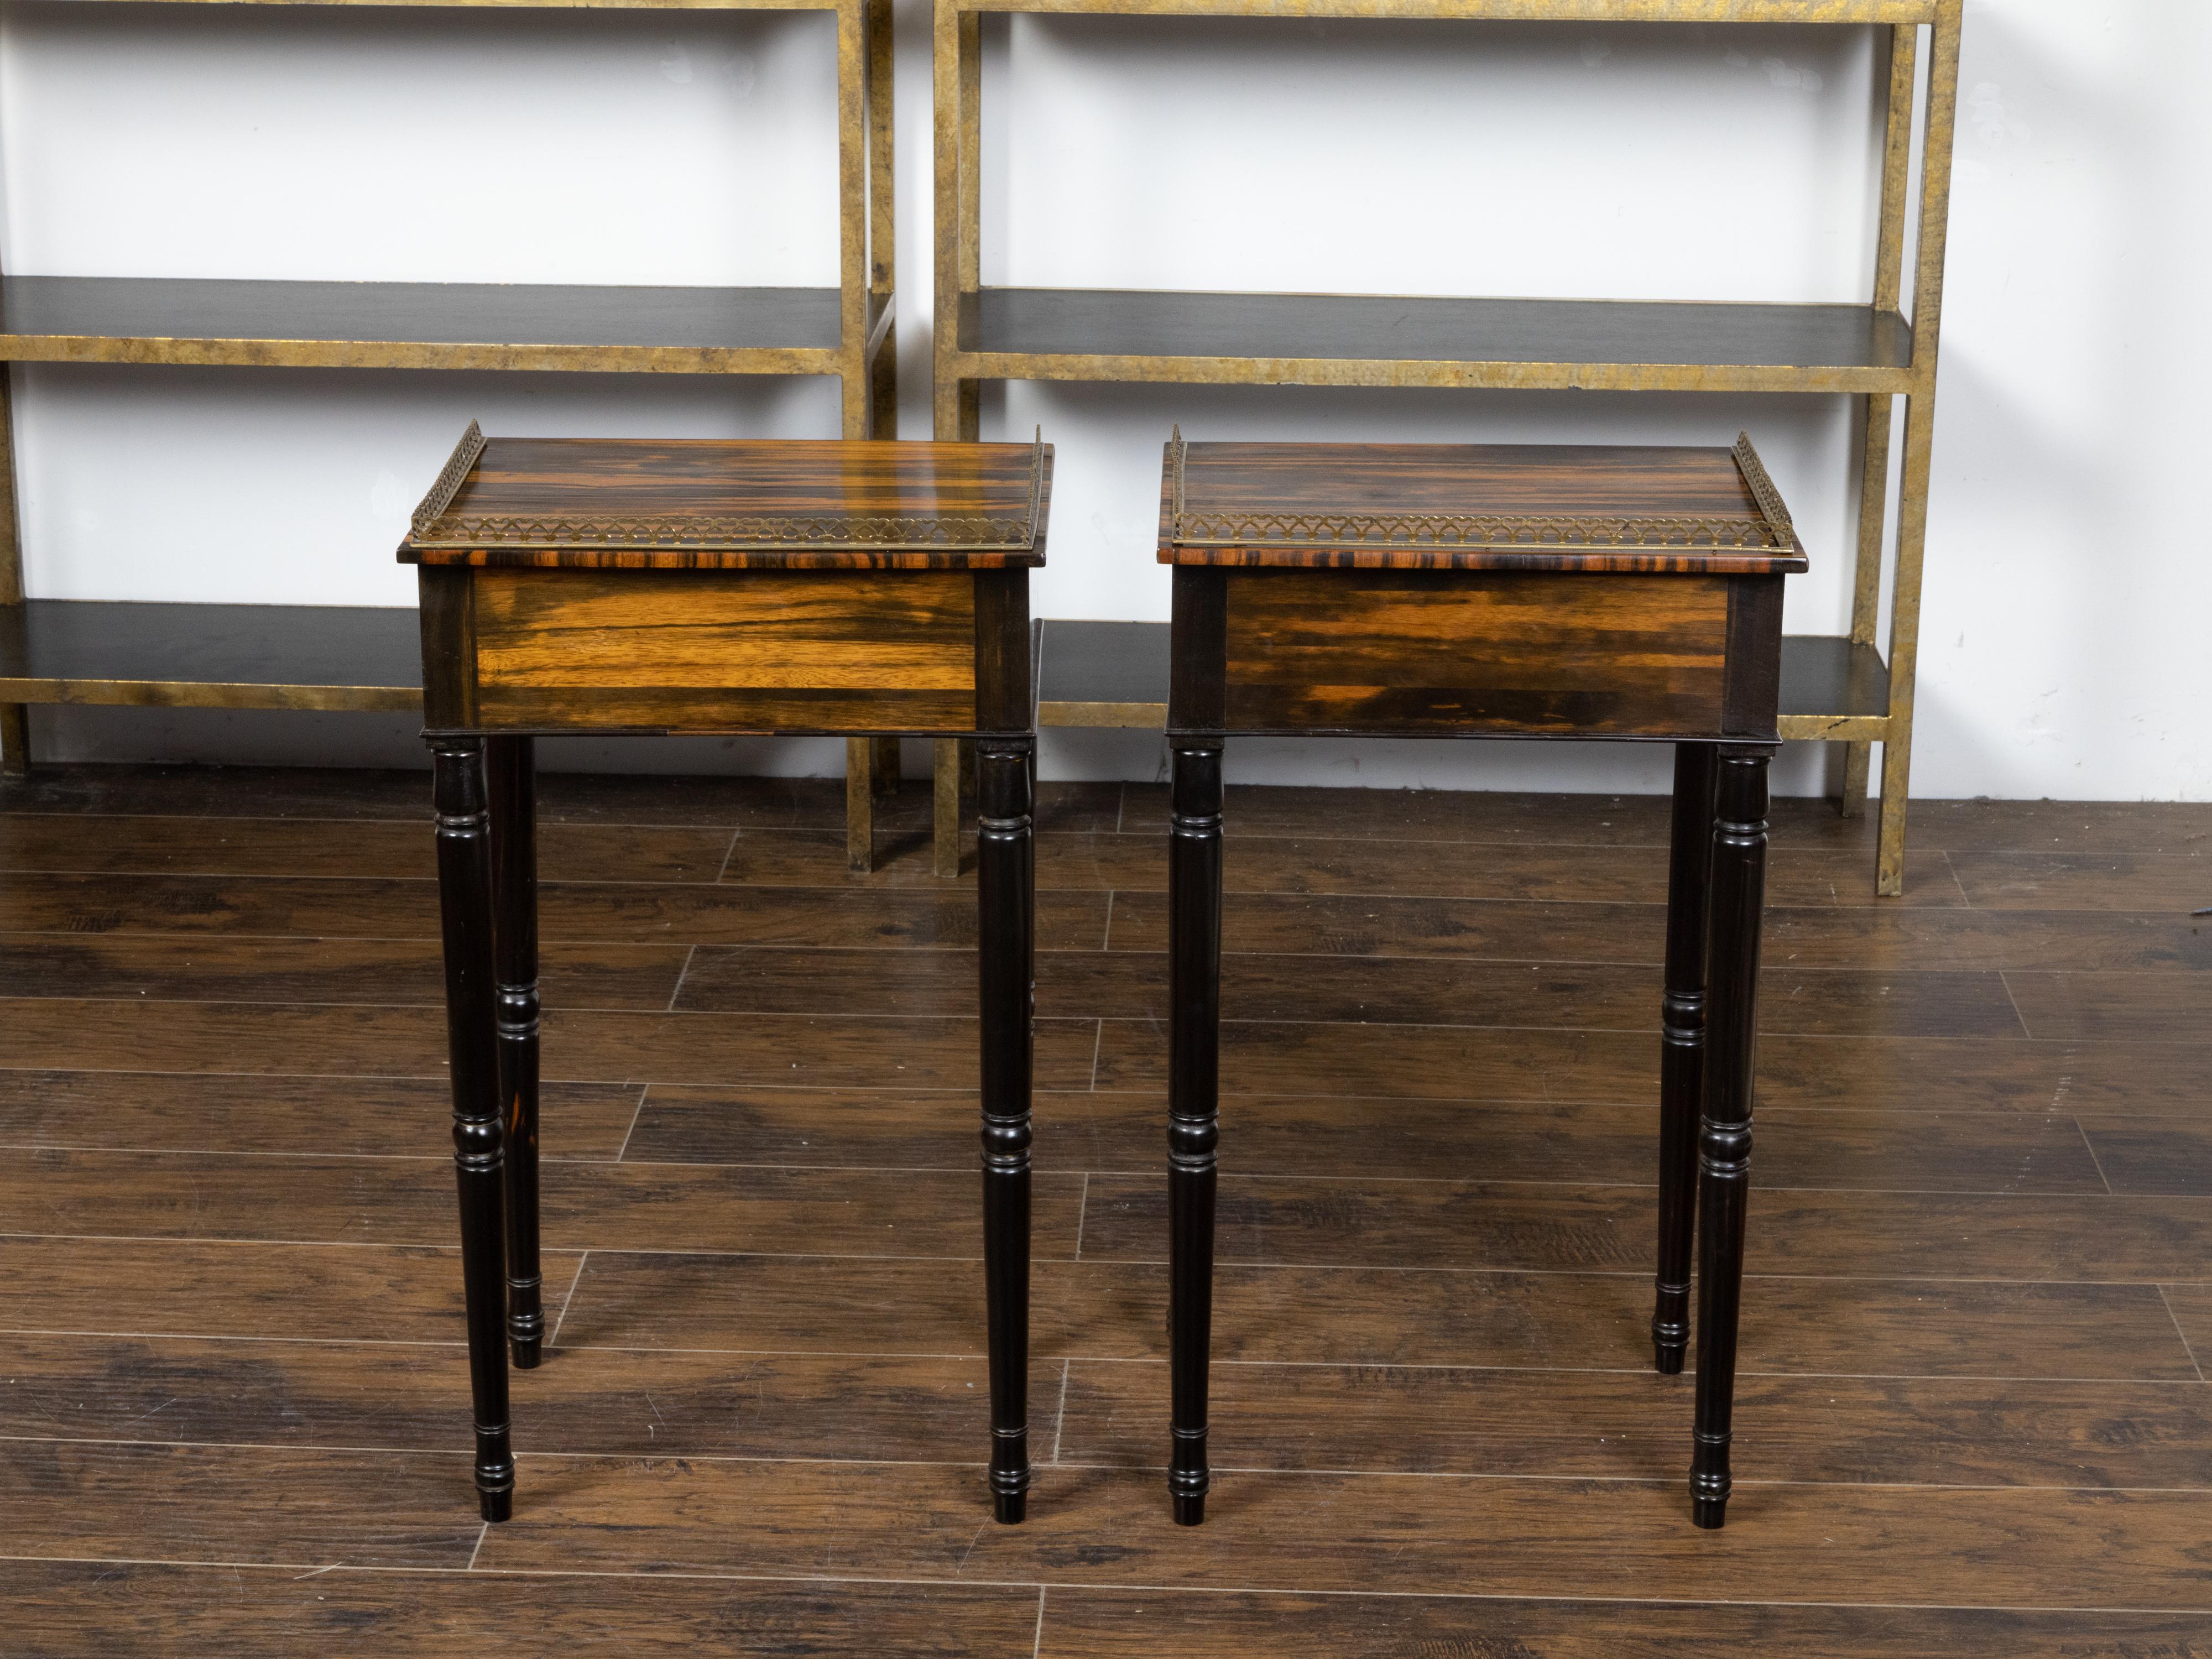 Pair of English Regency Period 19th Century Zebra Wood Tables with Brass Gallery For Sale 1